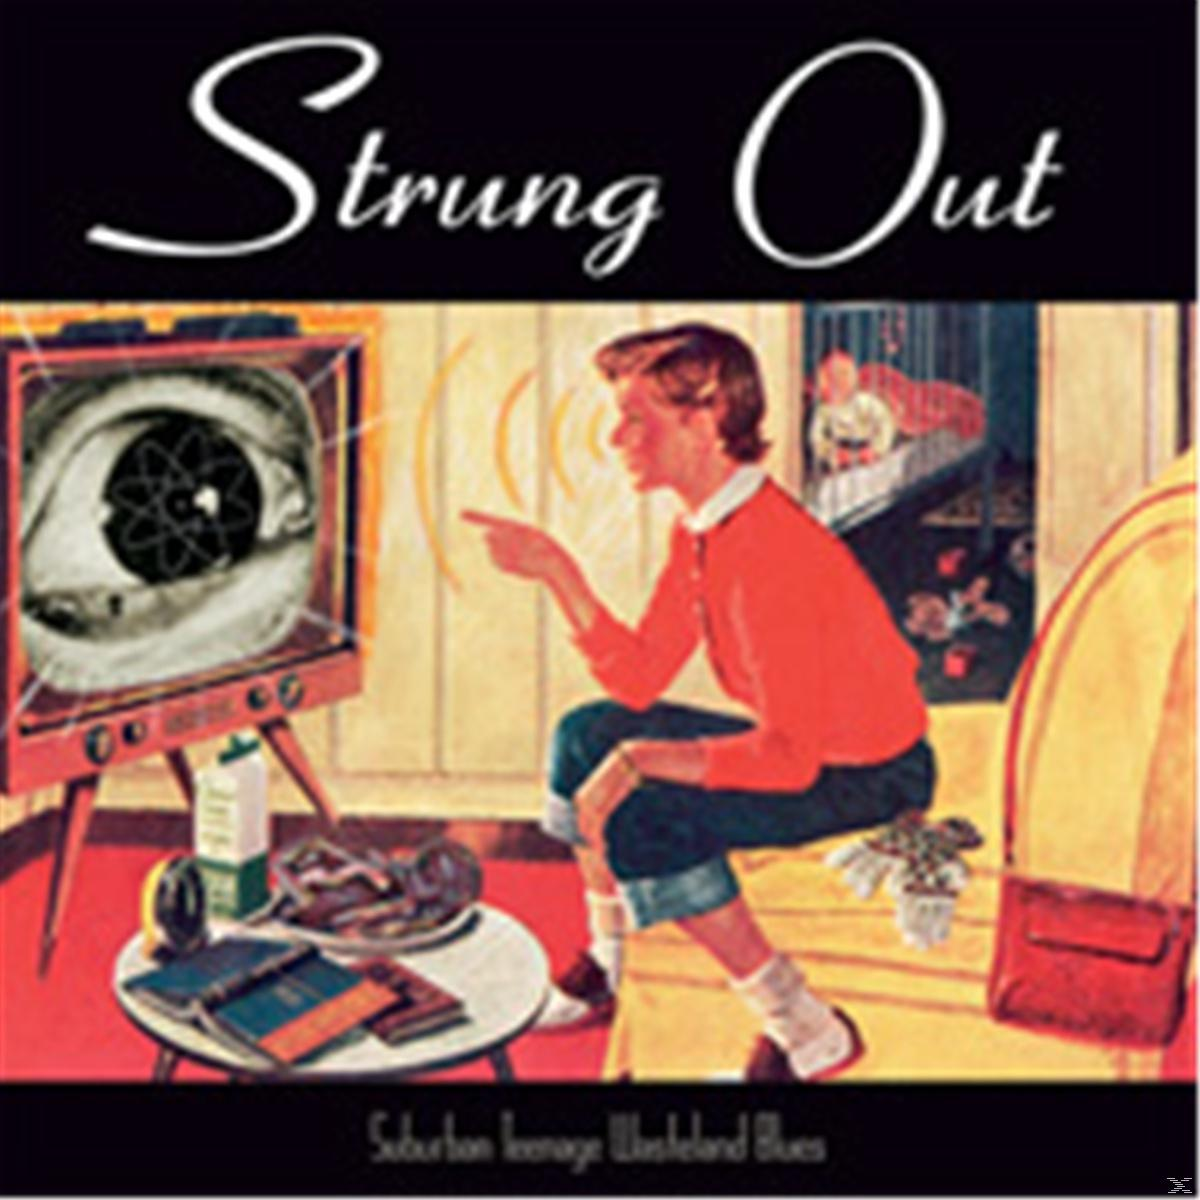 Strung Out (CD) - Wasteland - Teenage Suburban Blues (Reissue)